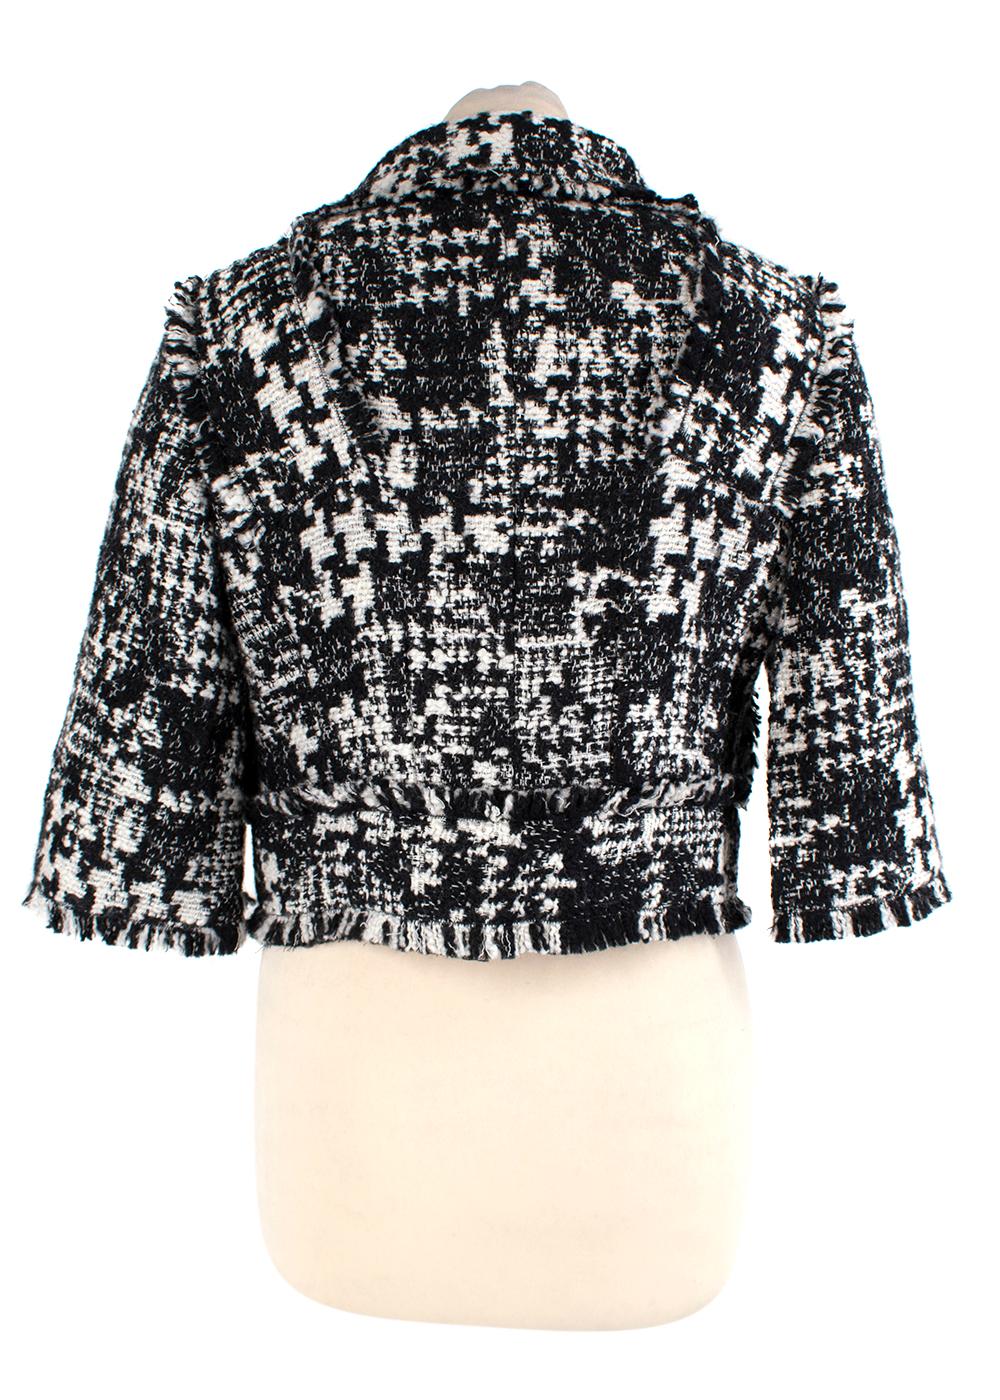 Dolce & Gabbana Black & White Short Tweed Jacket

- Cropped tweed jacket with a Peter Pan collar and half sleeves 
- Large embellished snap button fastenings running down the front opening 
- Fake flap pockets on either side 
- Fringed cuffs,